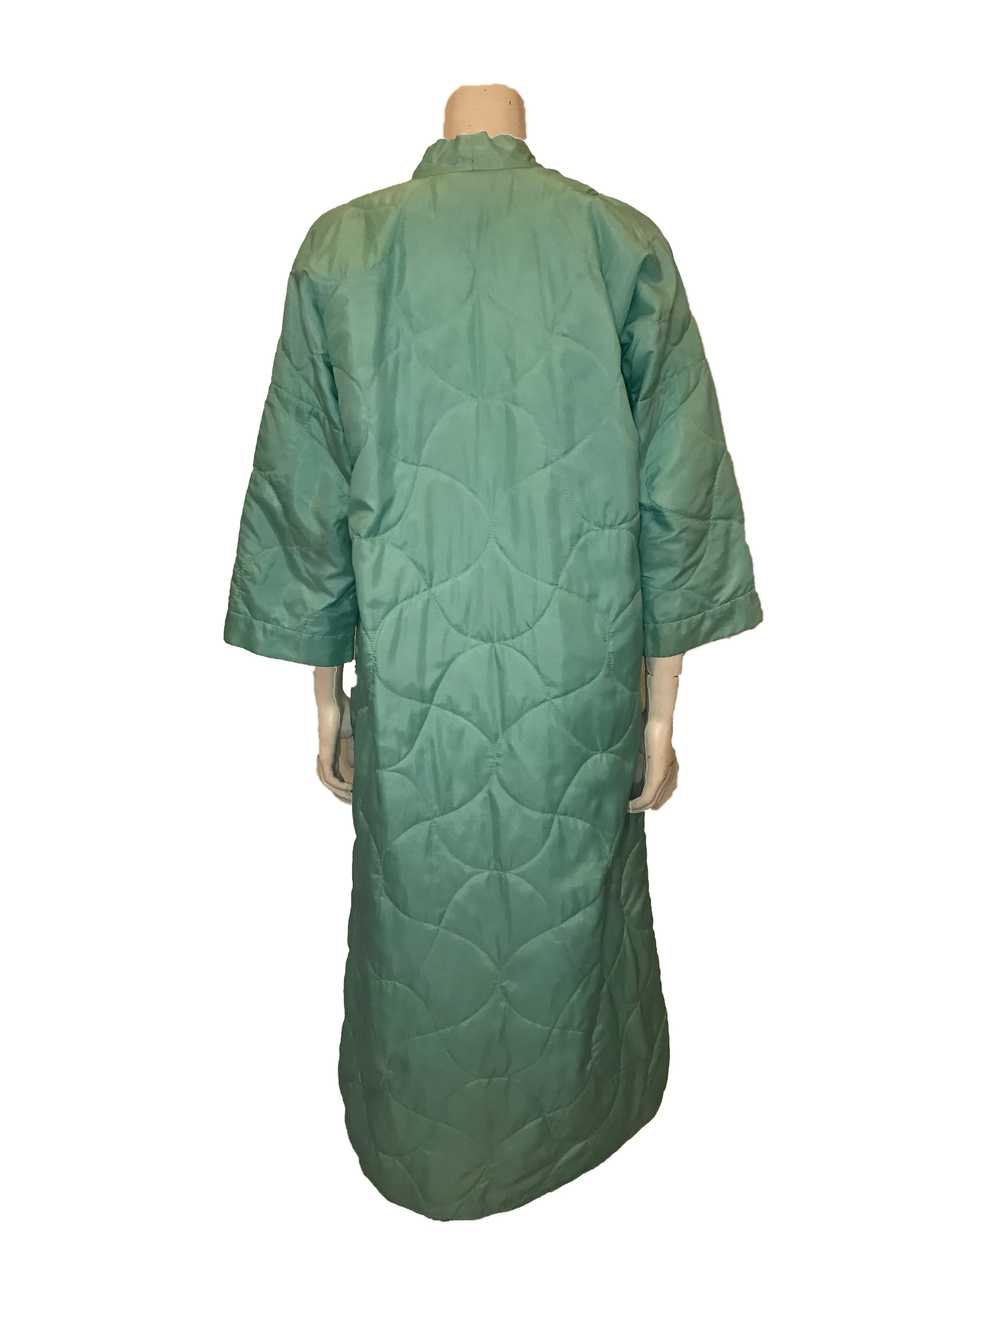 1960s Light Turquoise Quilted Robe - image 3